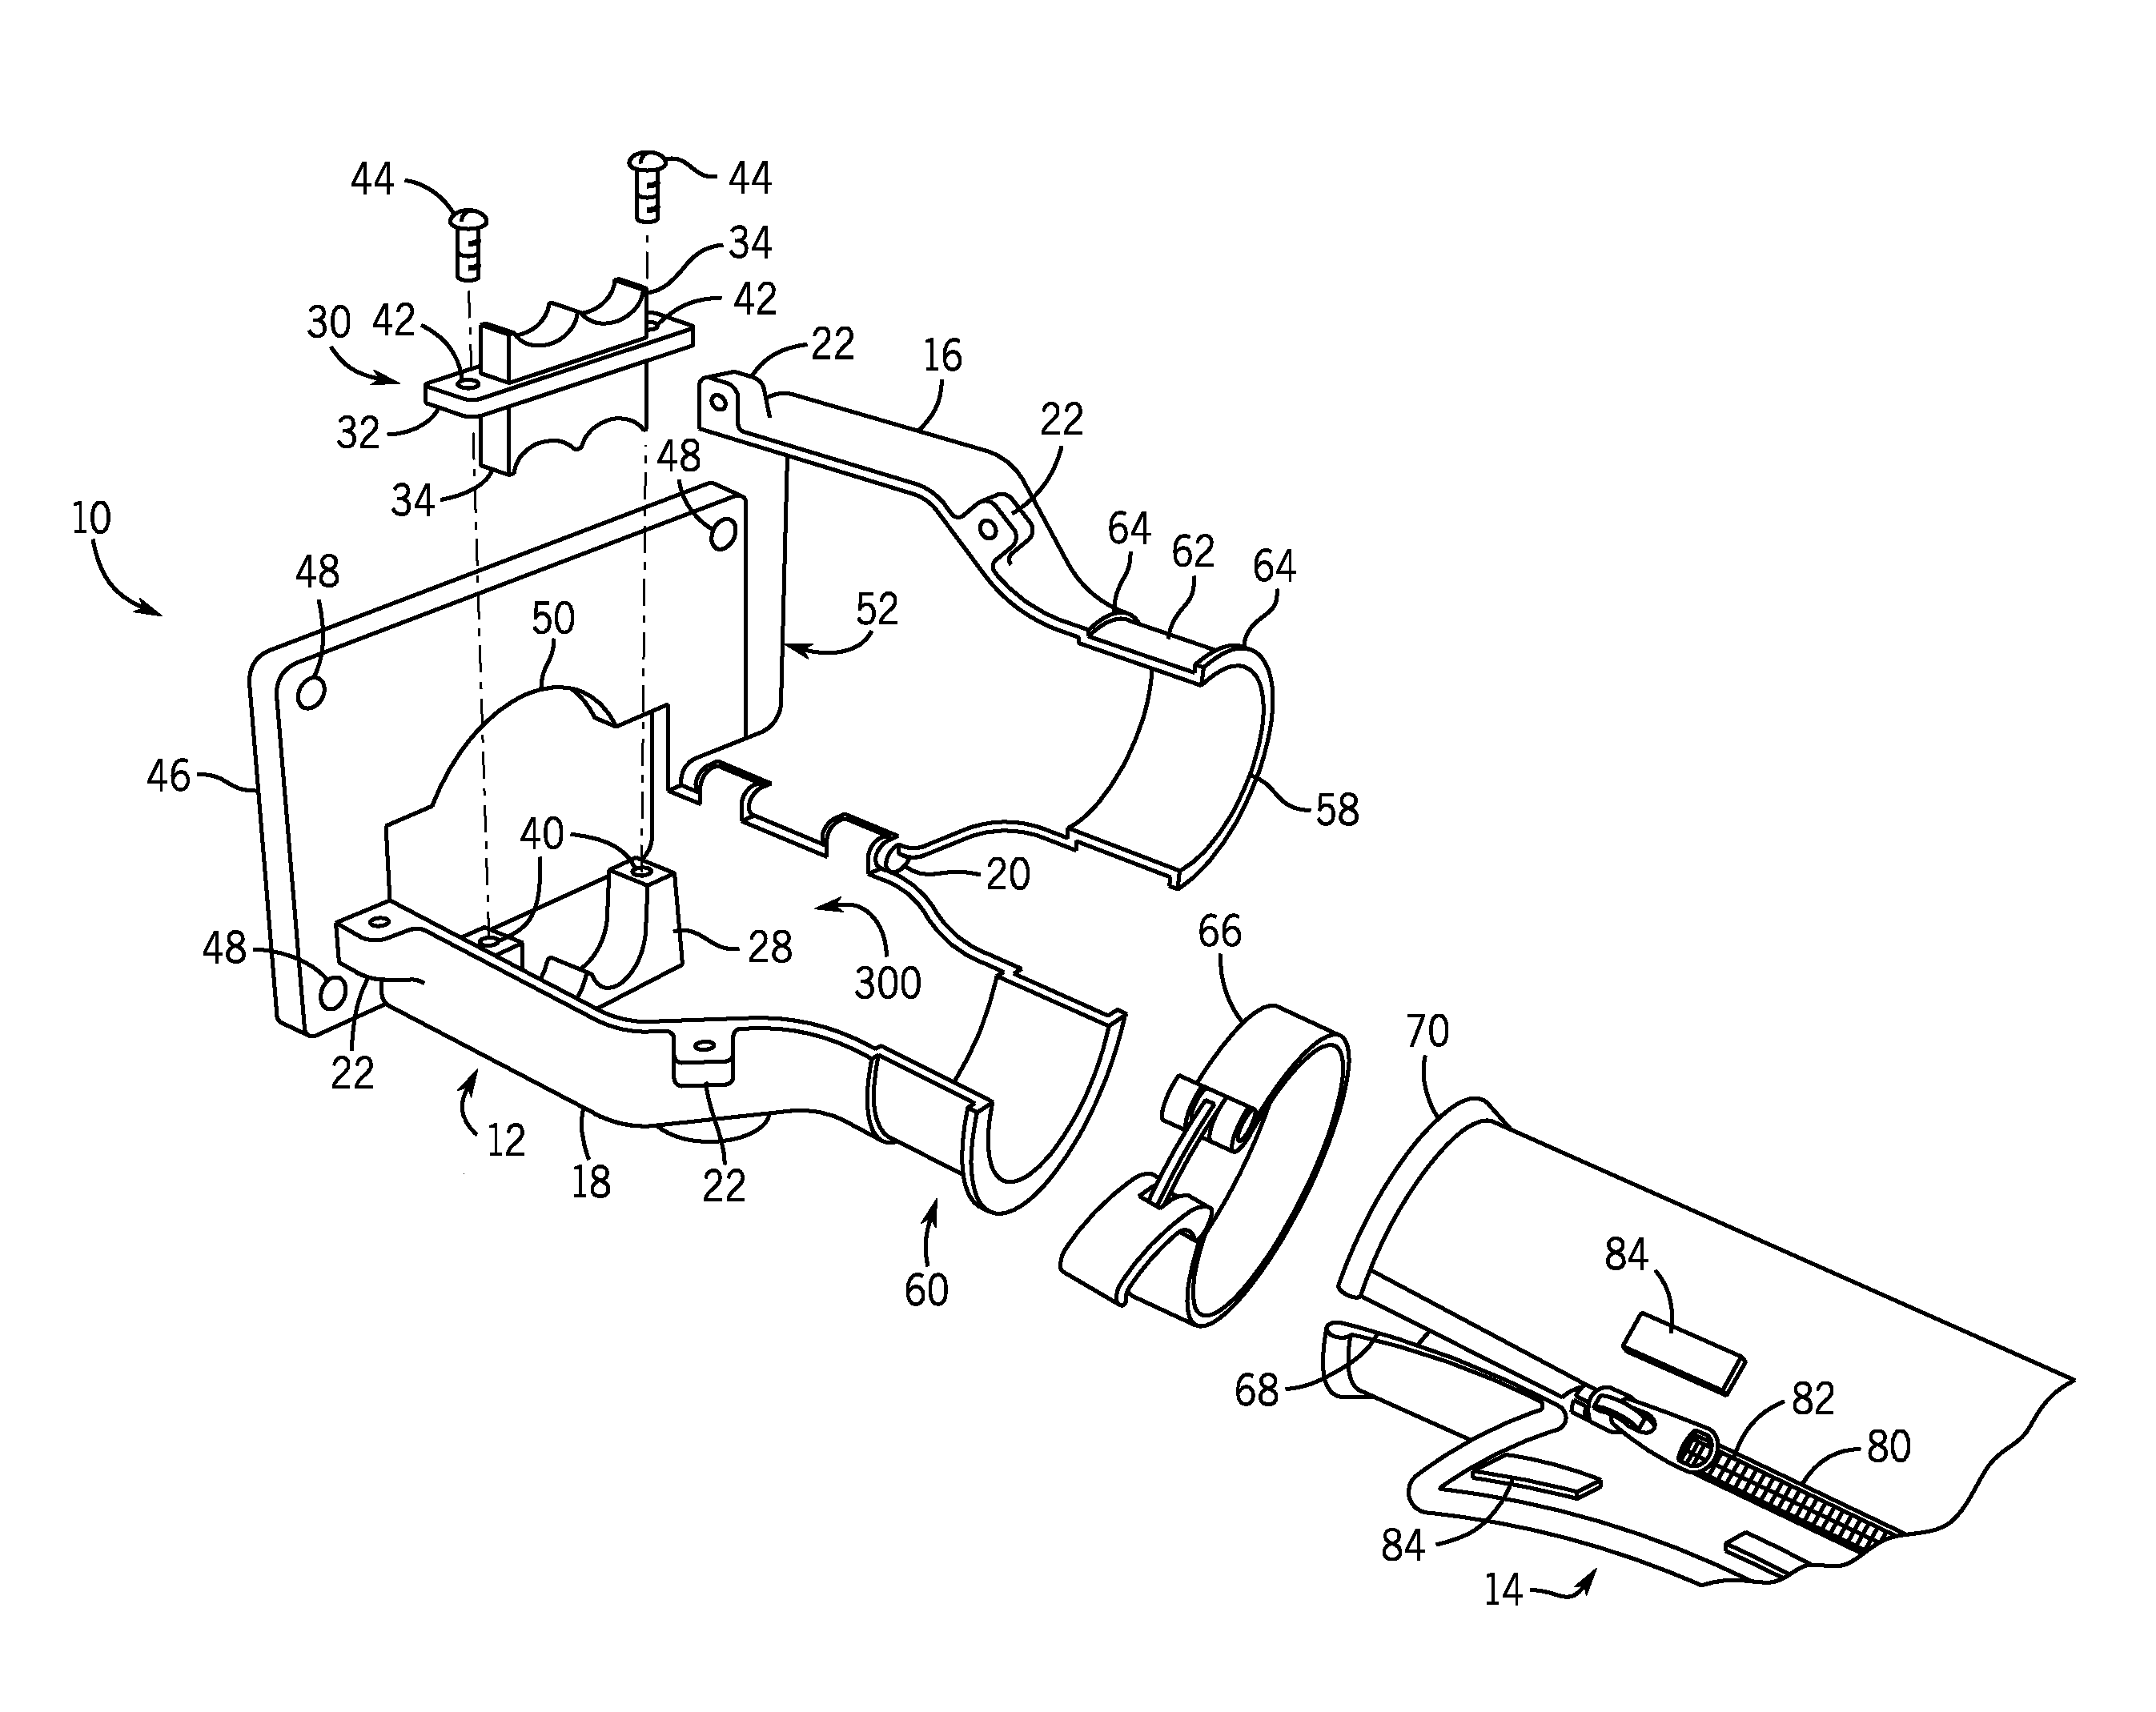 System and method for welding system cable management